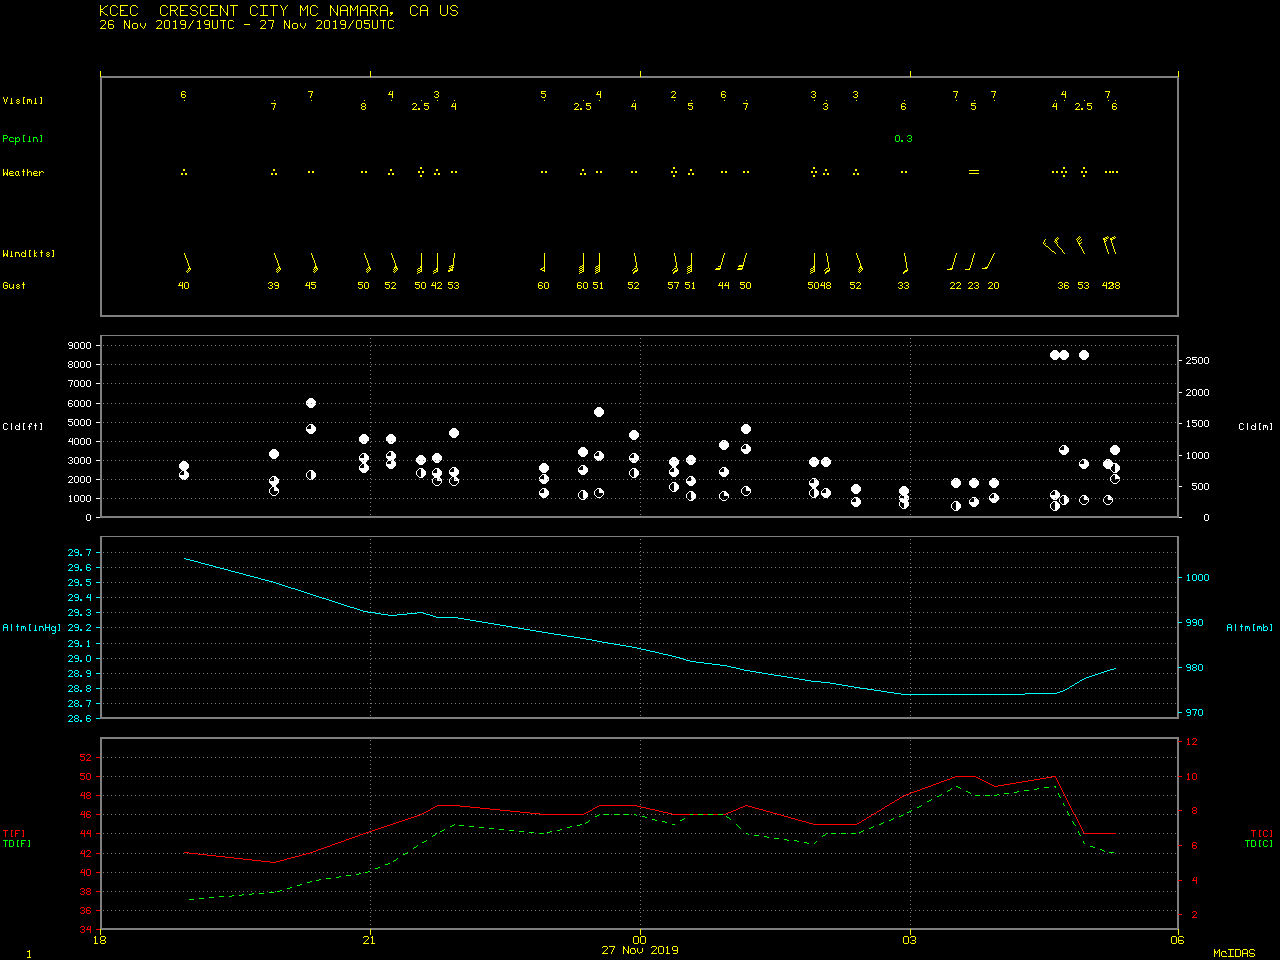 Time series of surface data at Crescent City, California [click to enlarge]